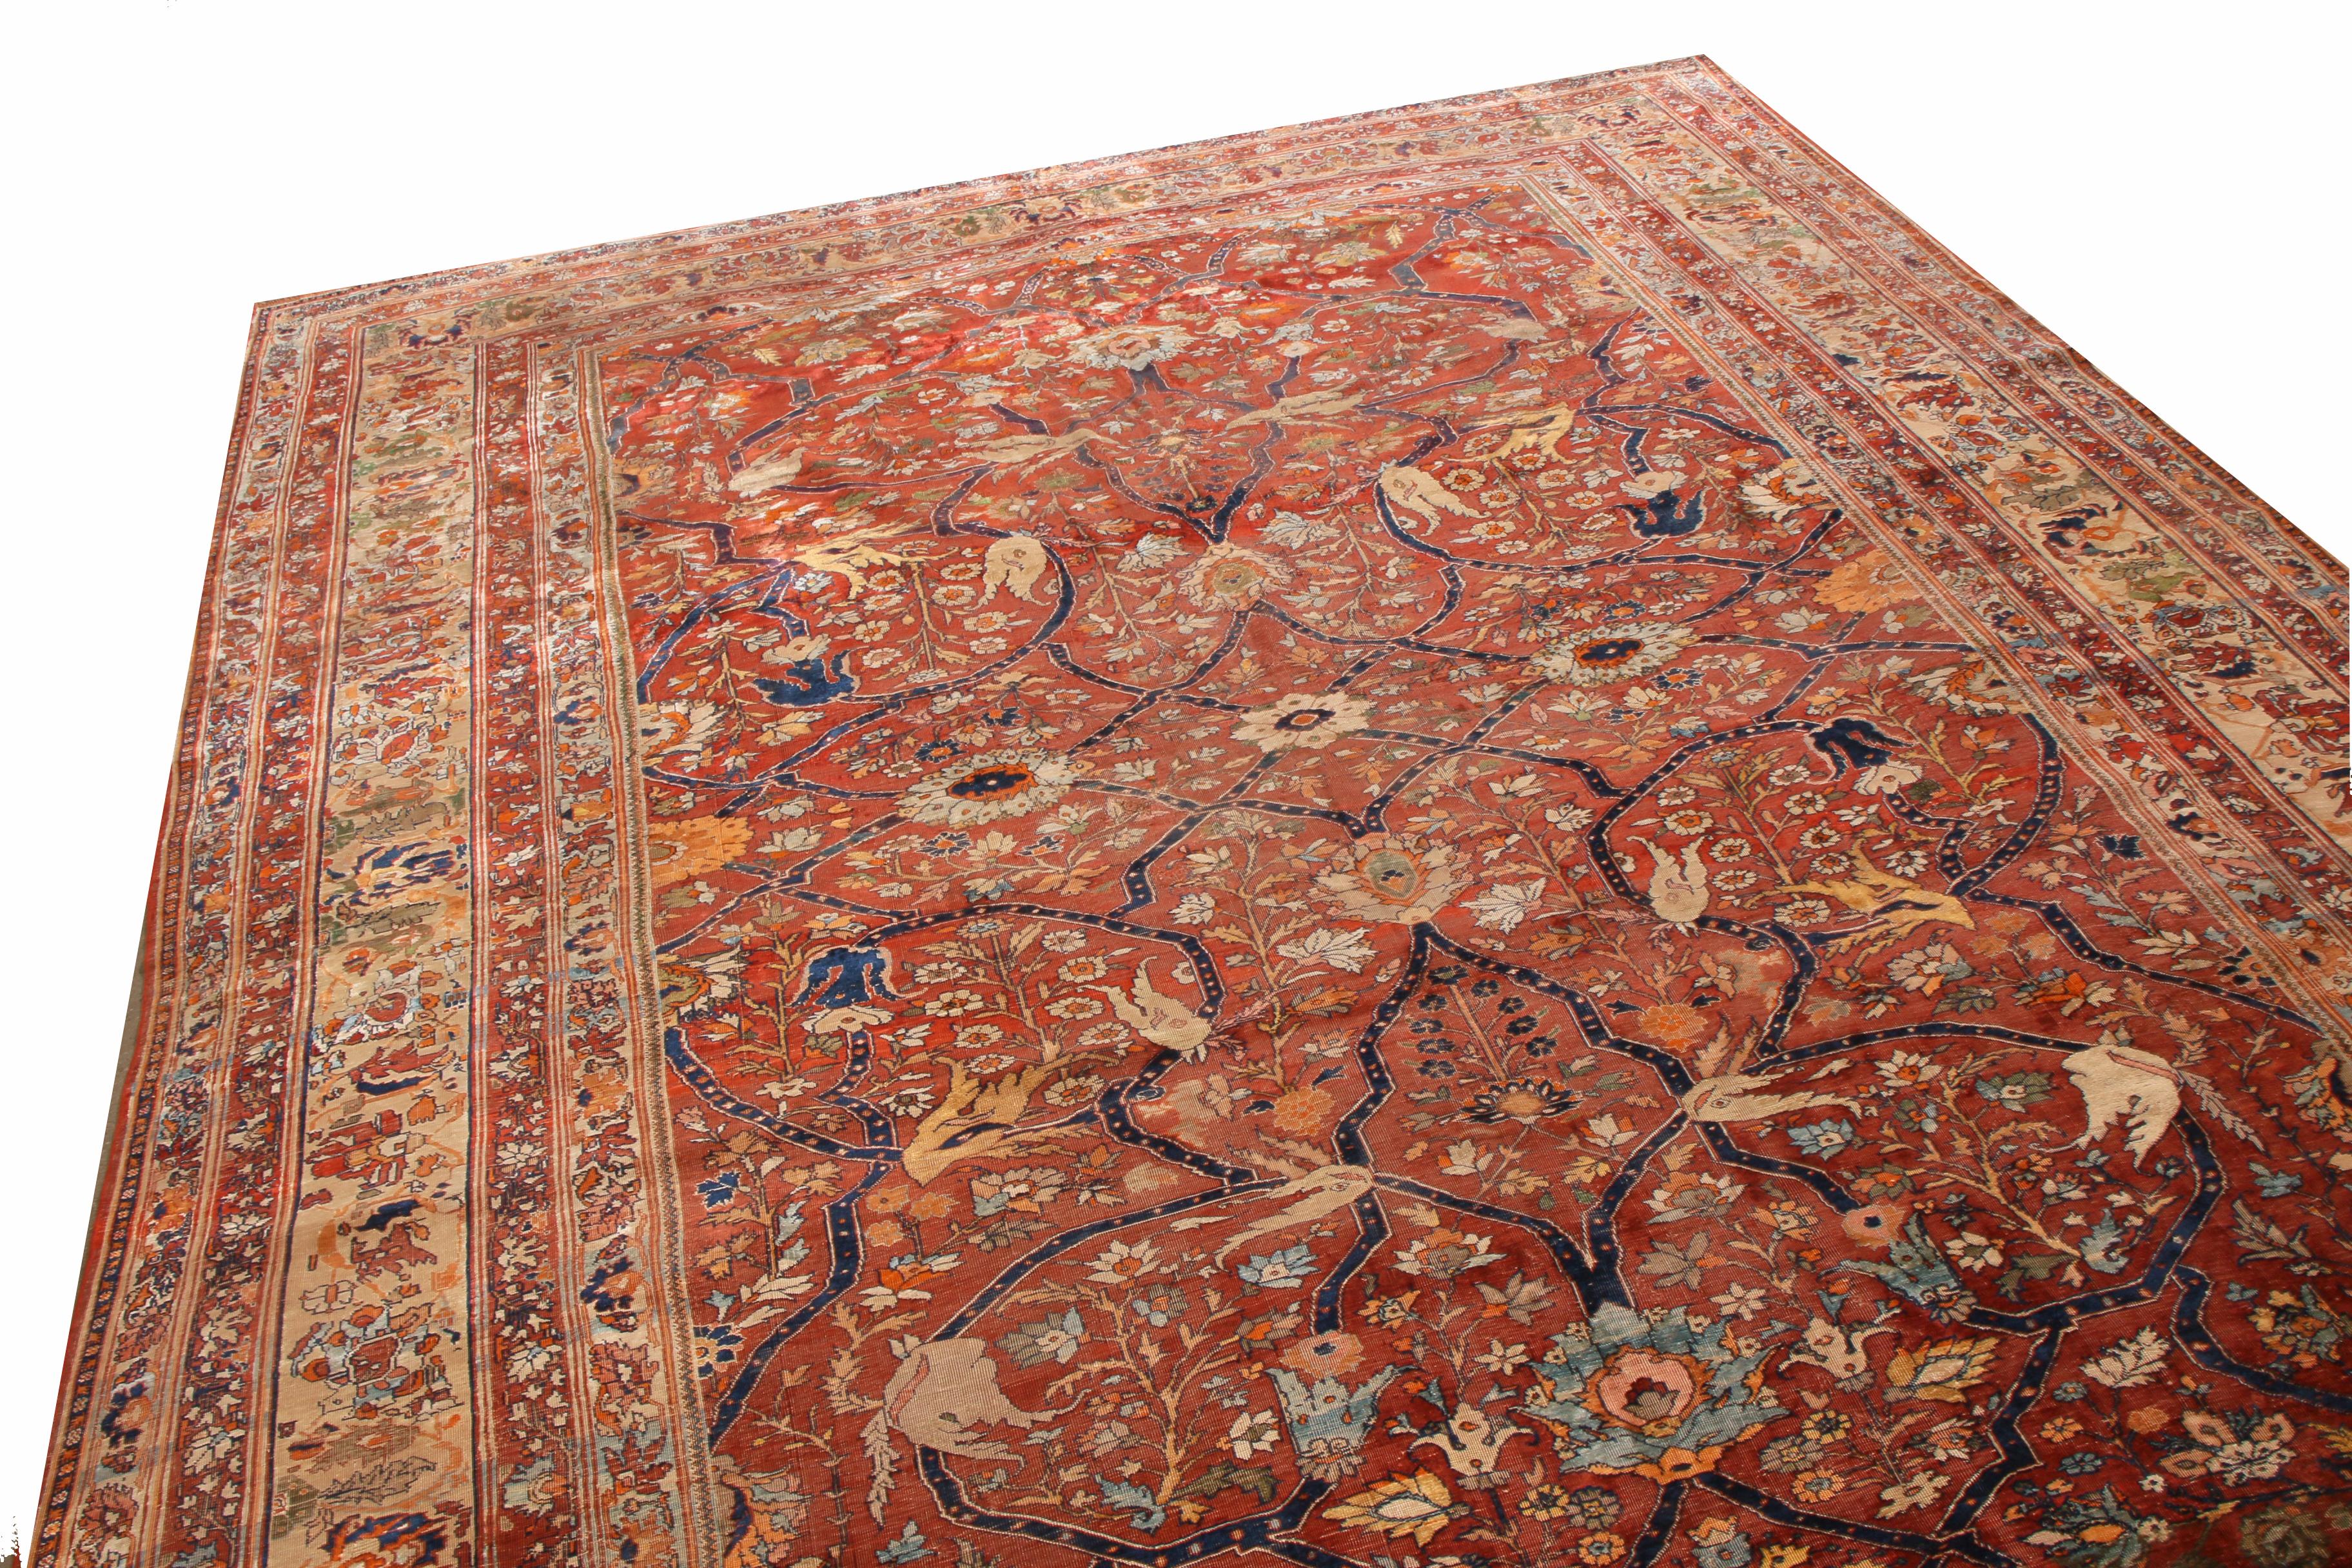 Hand knotted in high quality wool originating from Persia in 1880, this antique Tabriz transitional wool rug features lotus and palmette floral motifs in an all-over field design, representing eternity and rejuvenation in autumnal burgundy brown and